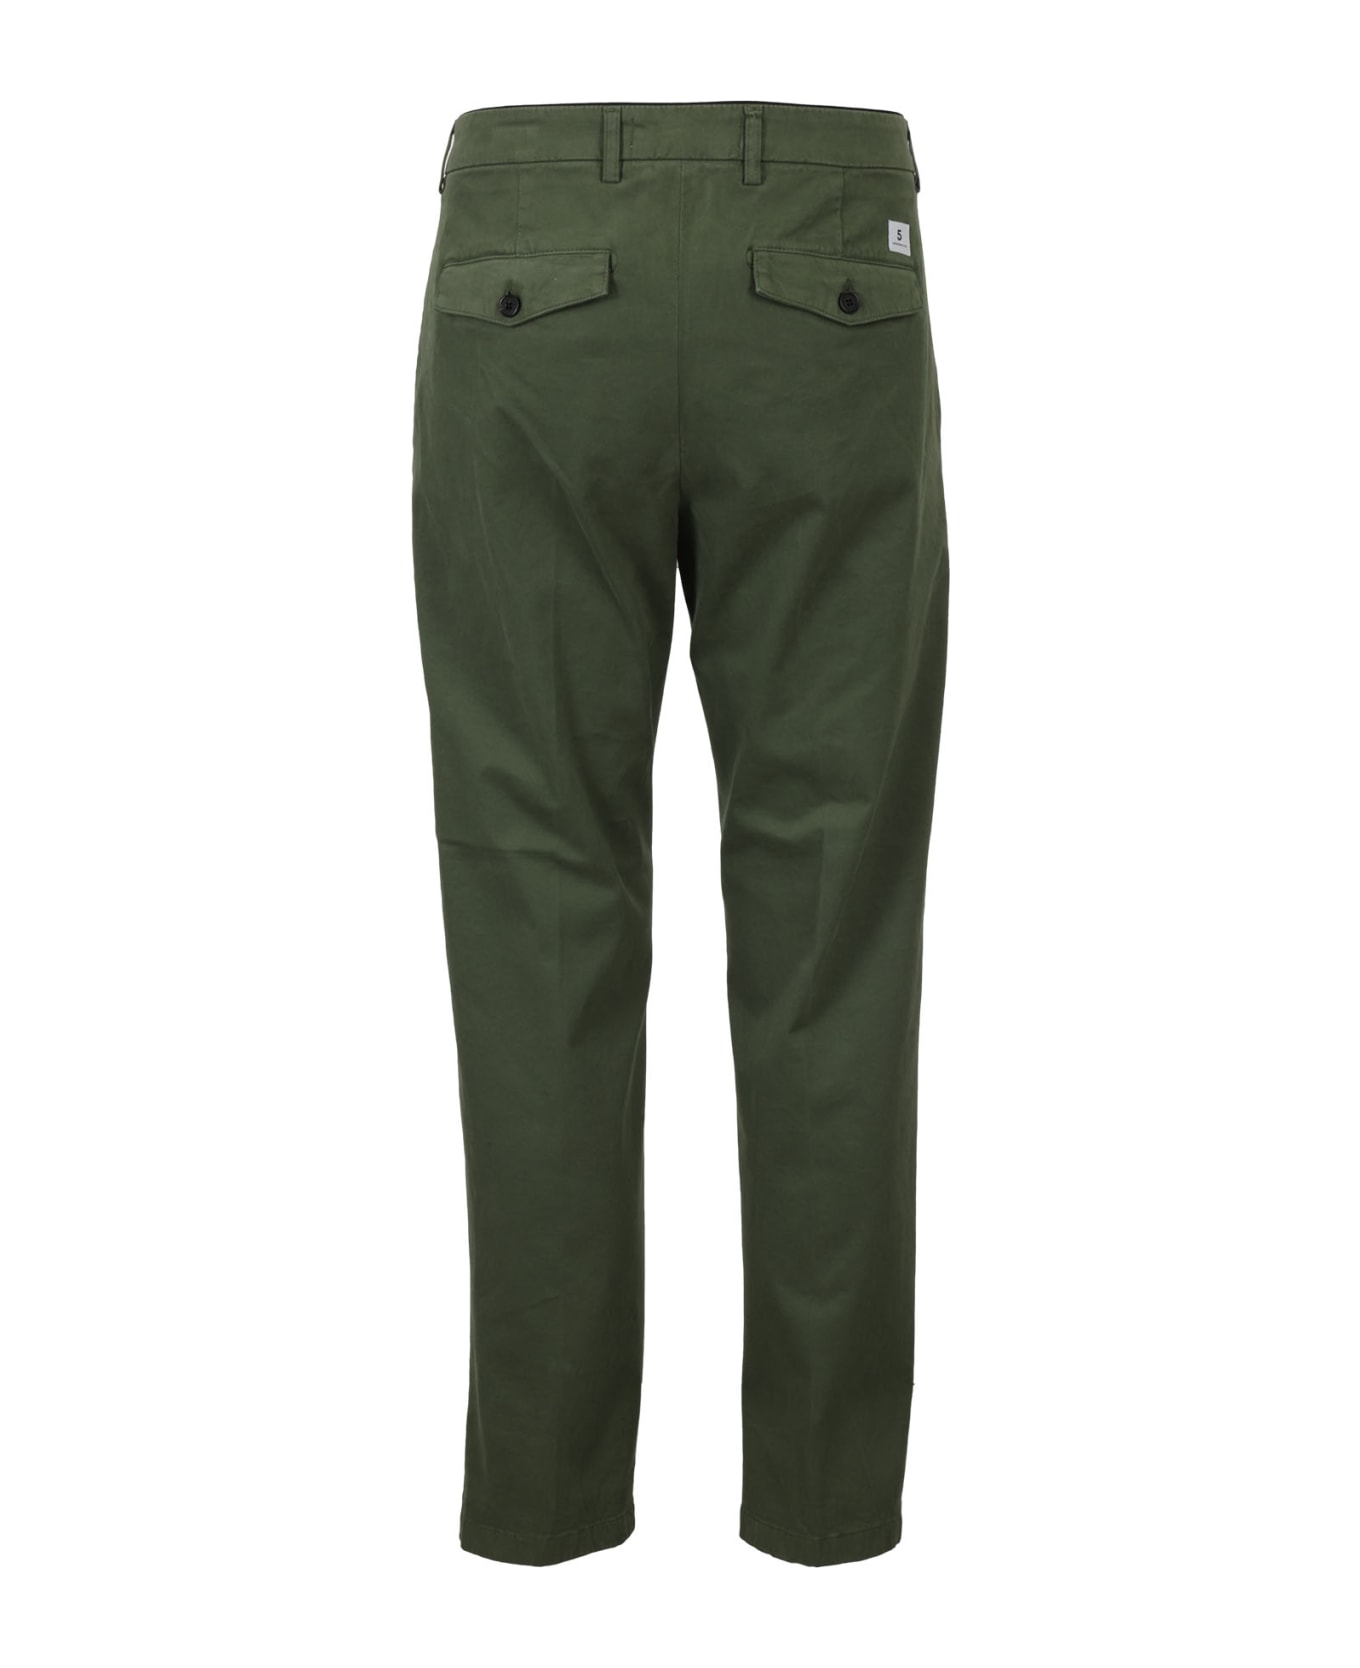 Department Five Prince Pences Chinos - Militare ボトムス